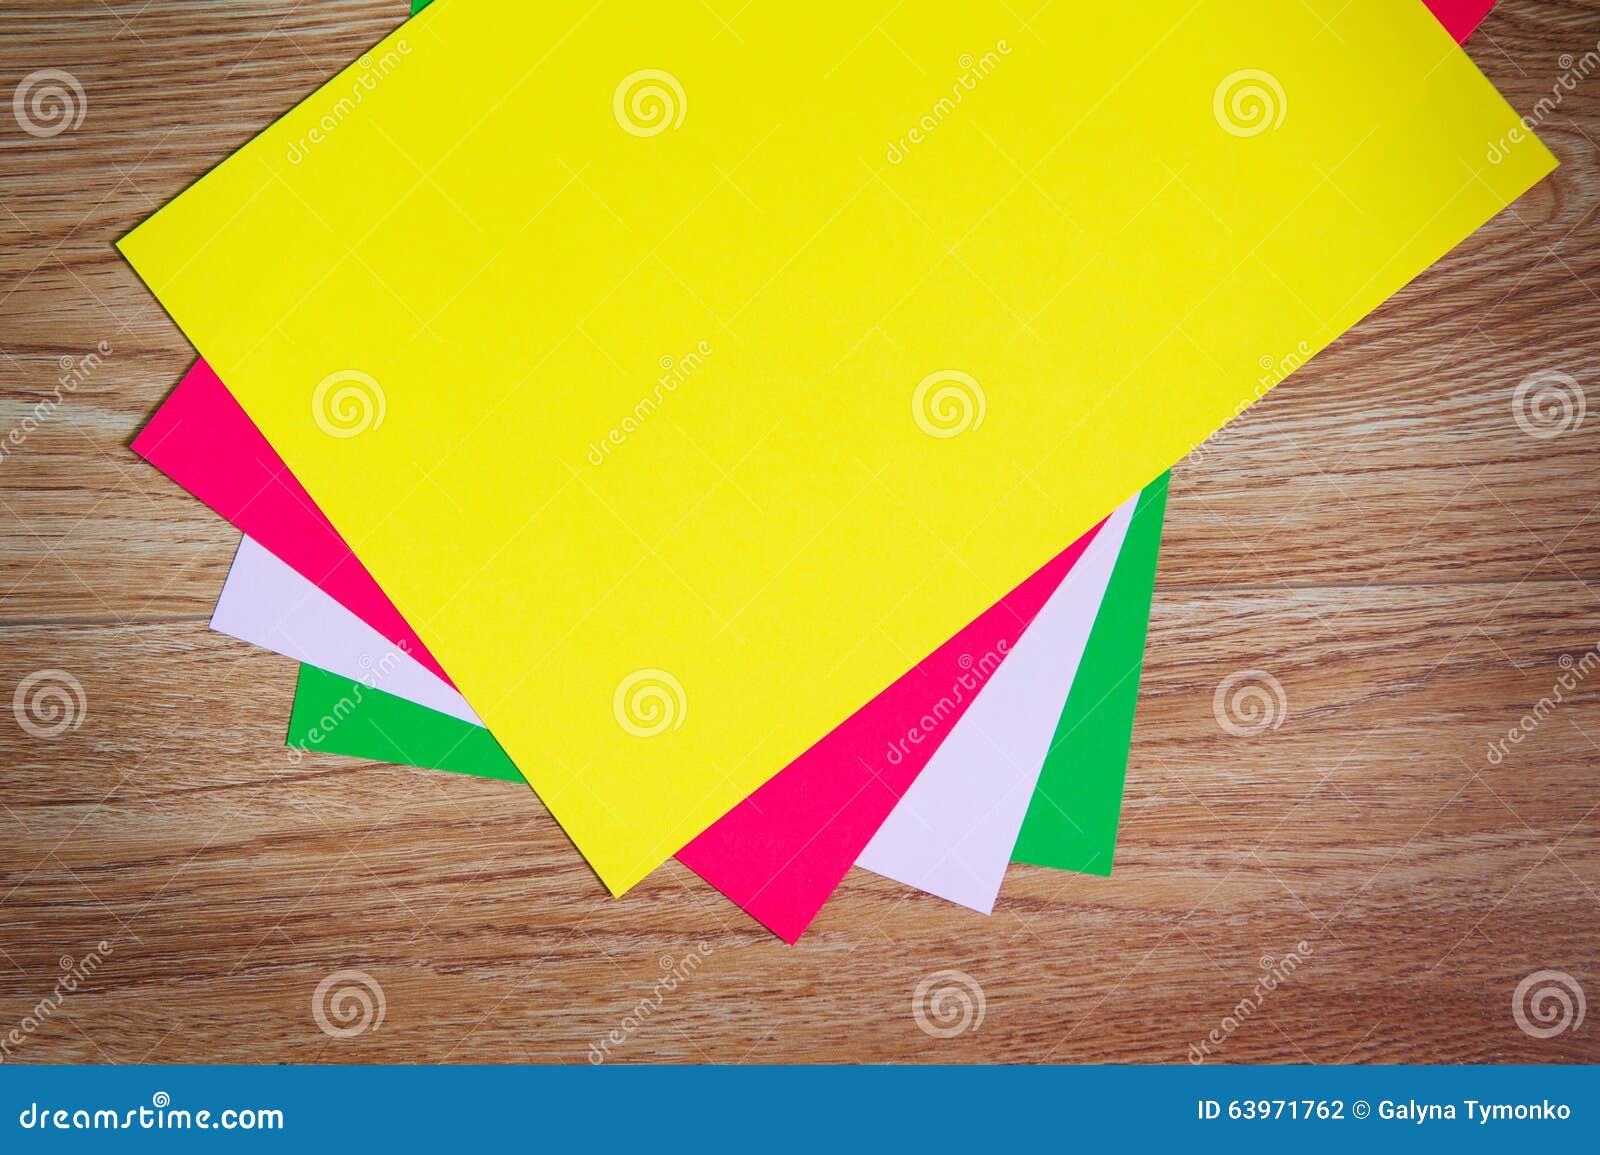 Colored Sheets Of Paper Stacked On A Wooden Floor Stock Photo